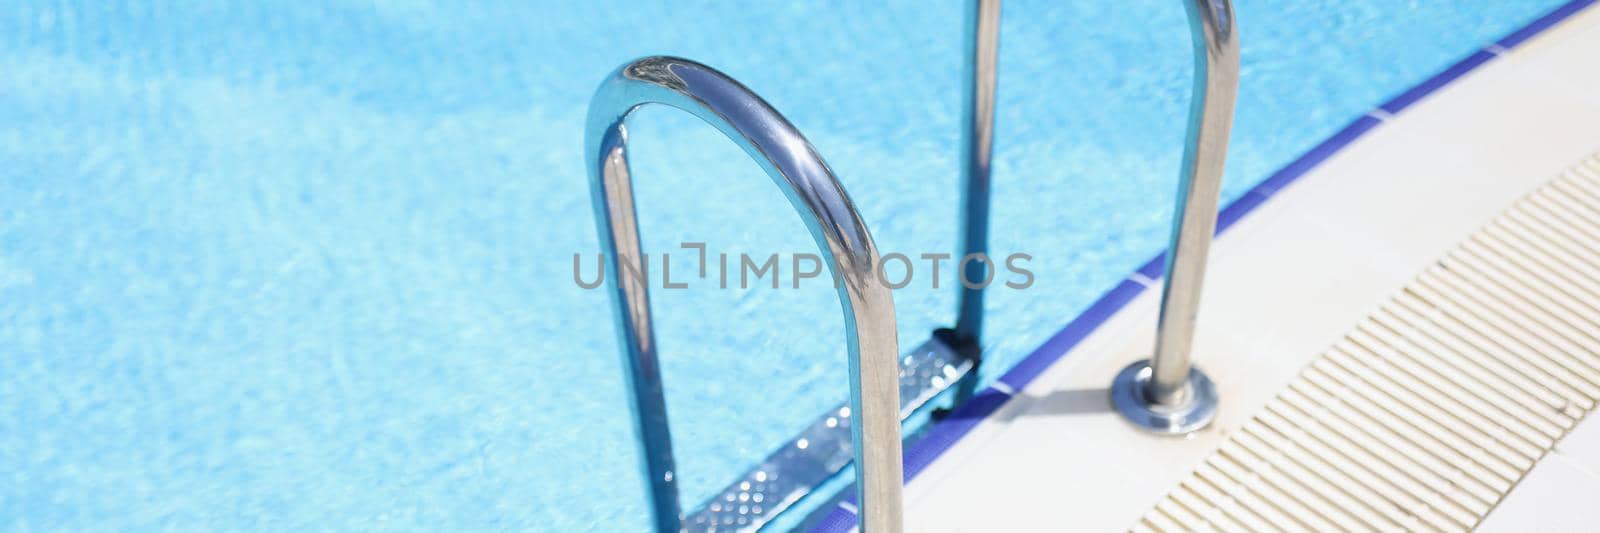 Ladder stainless handrails for descent into swimming pool safely by kuprevich